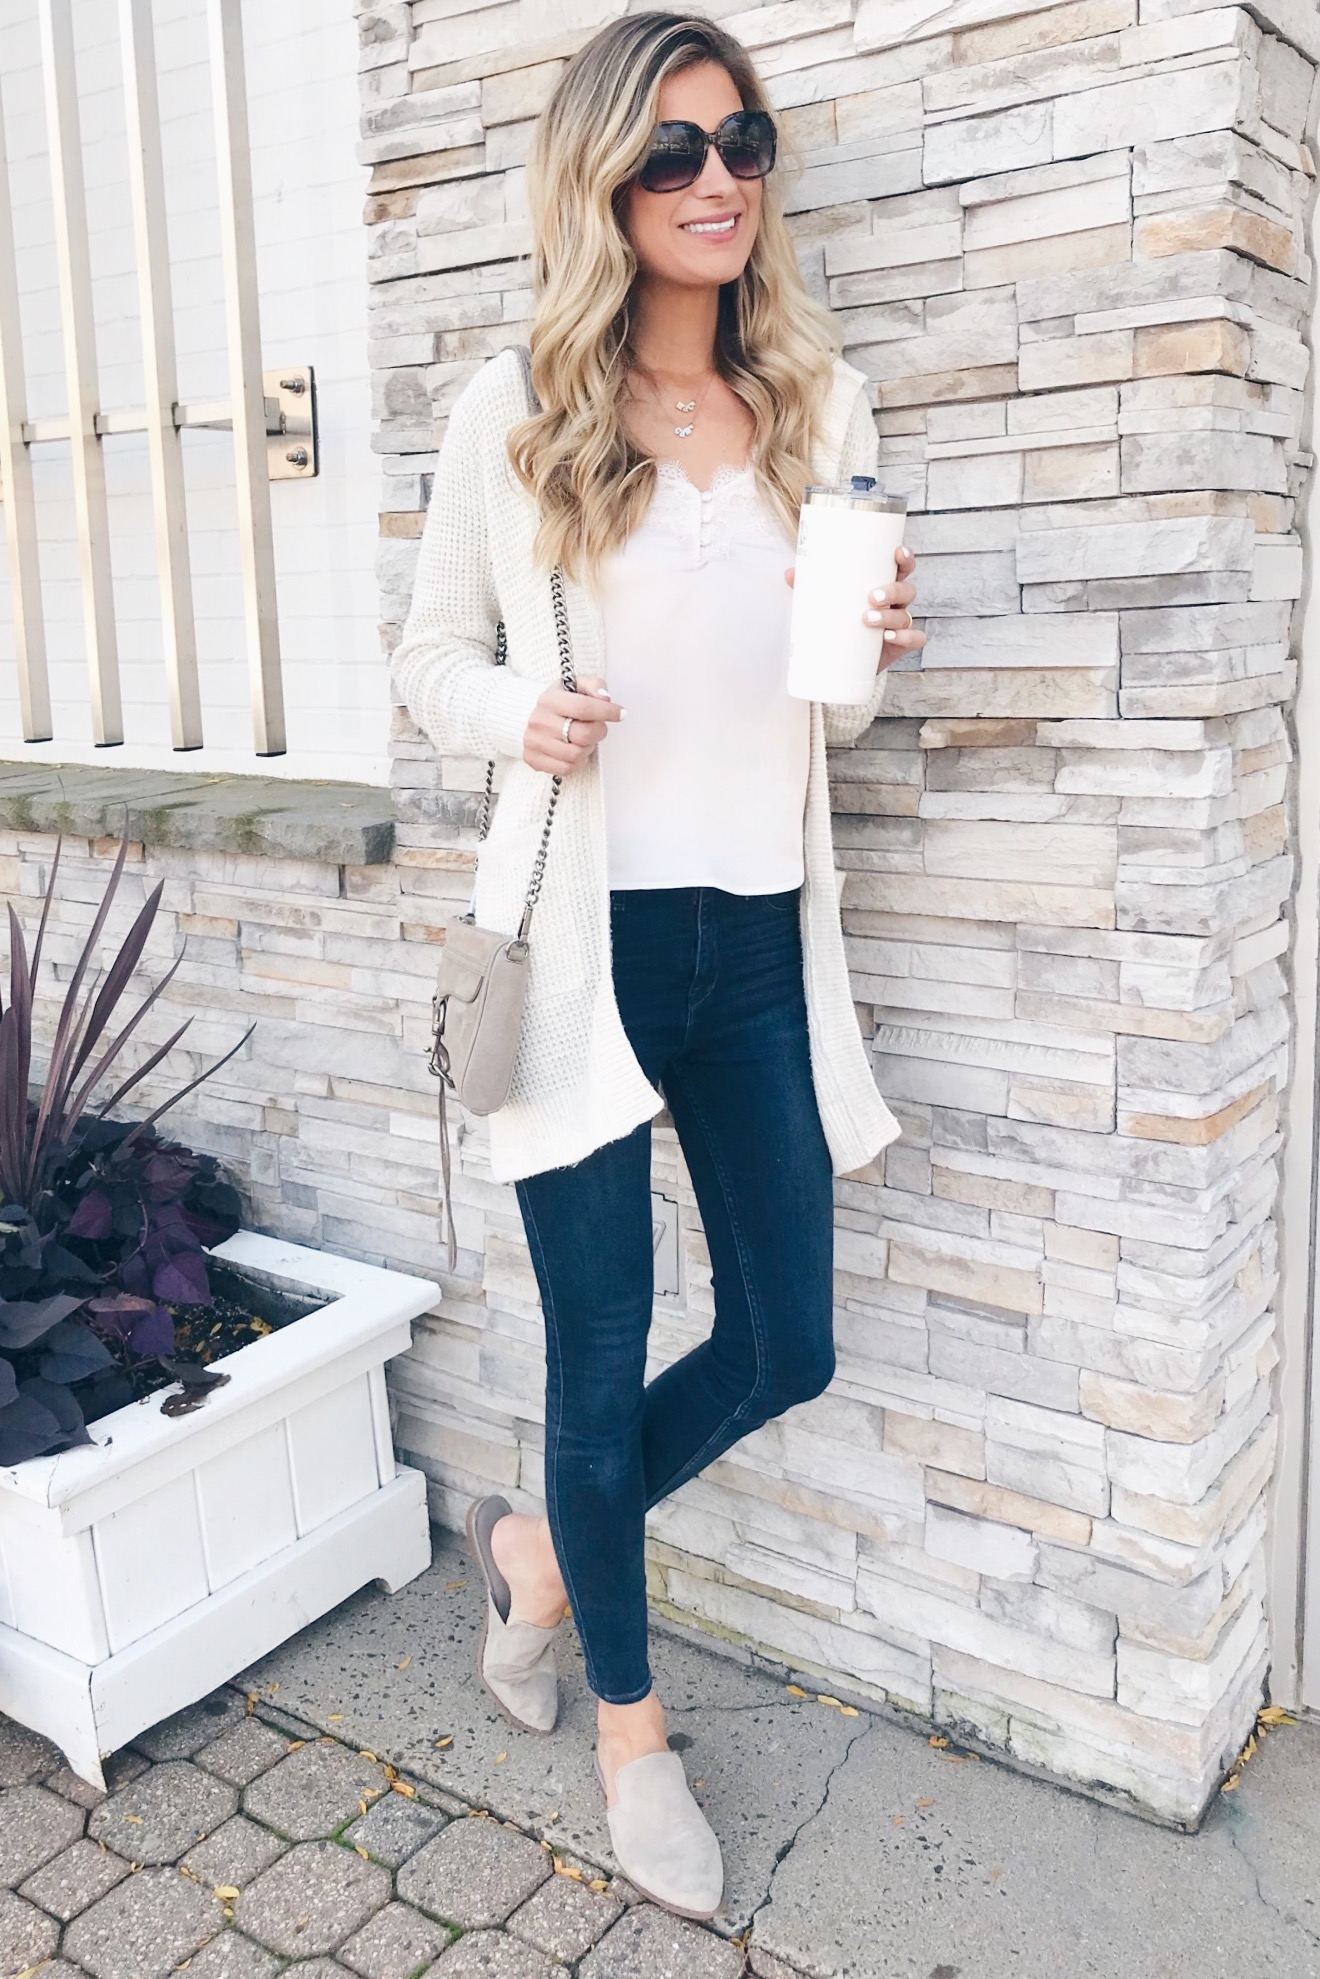 Long Cardigan Outfit Ideas